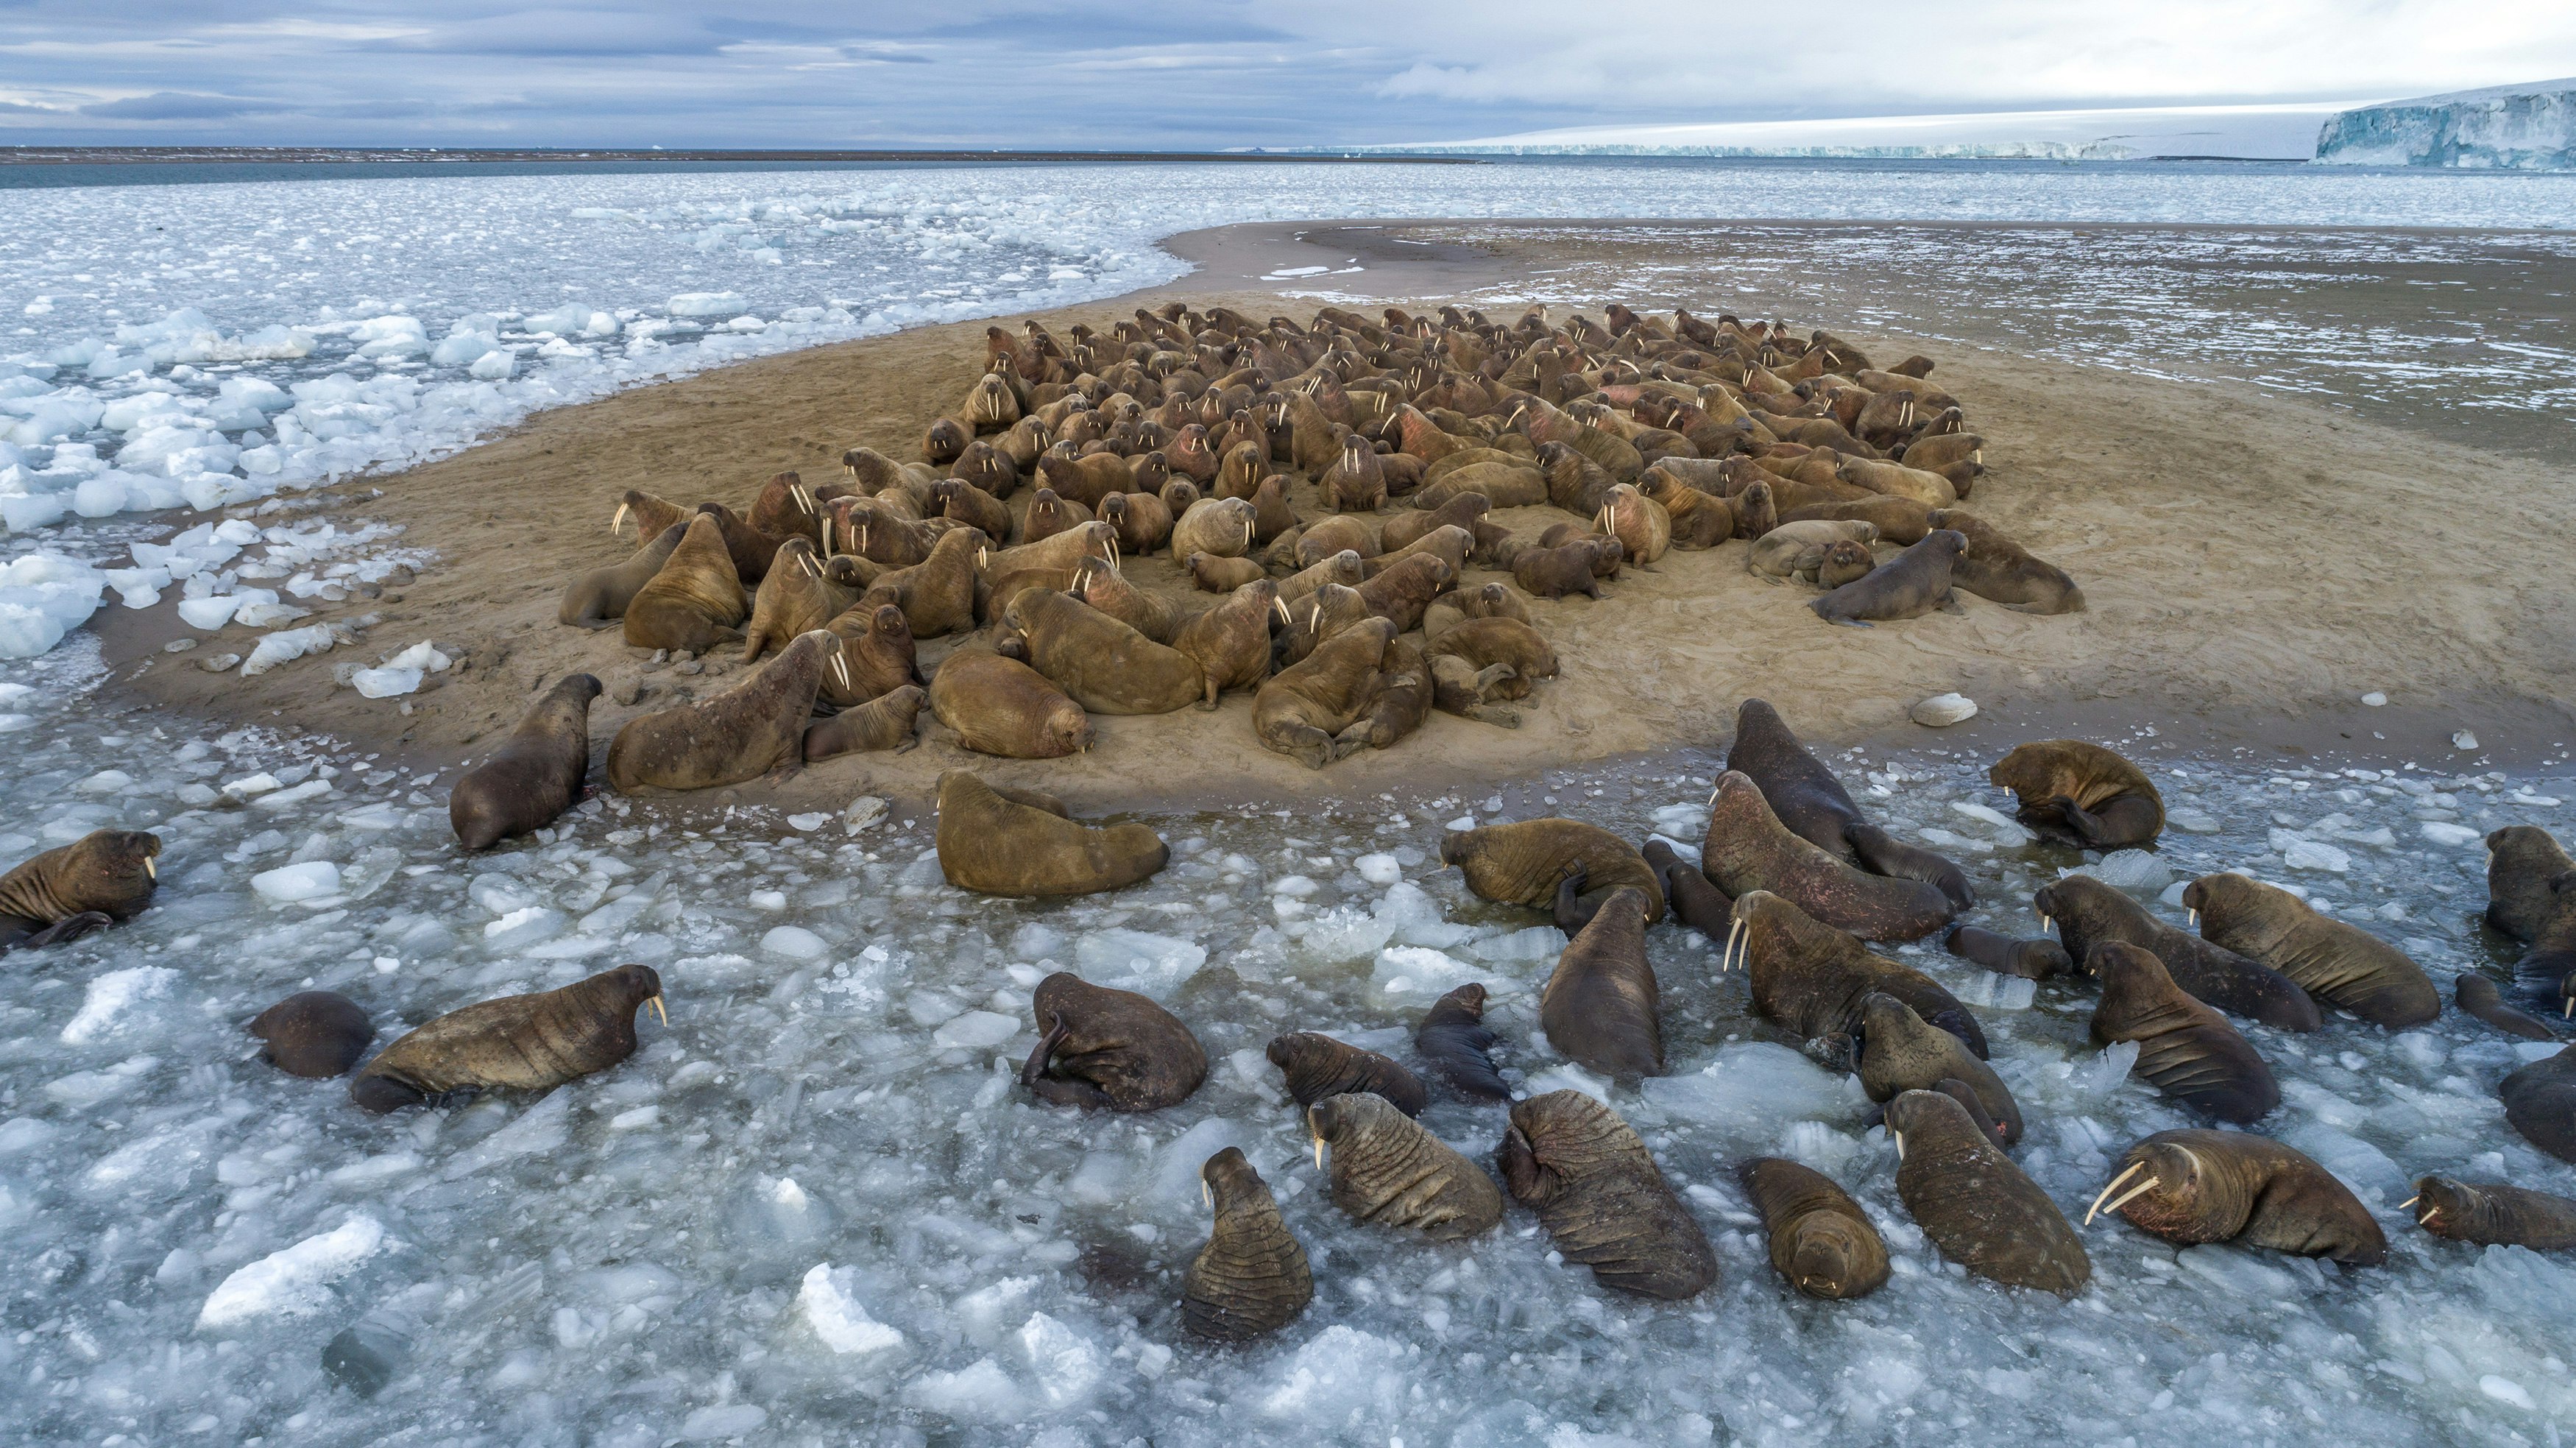 A group of walruses haul out on to an island surrounded by ice